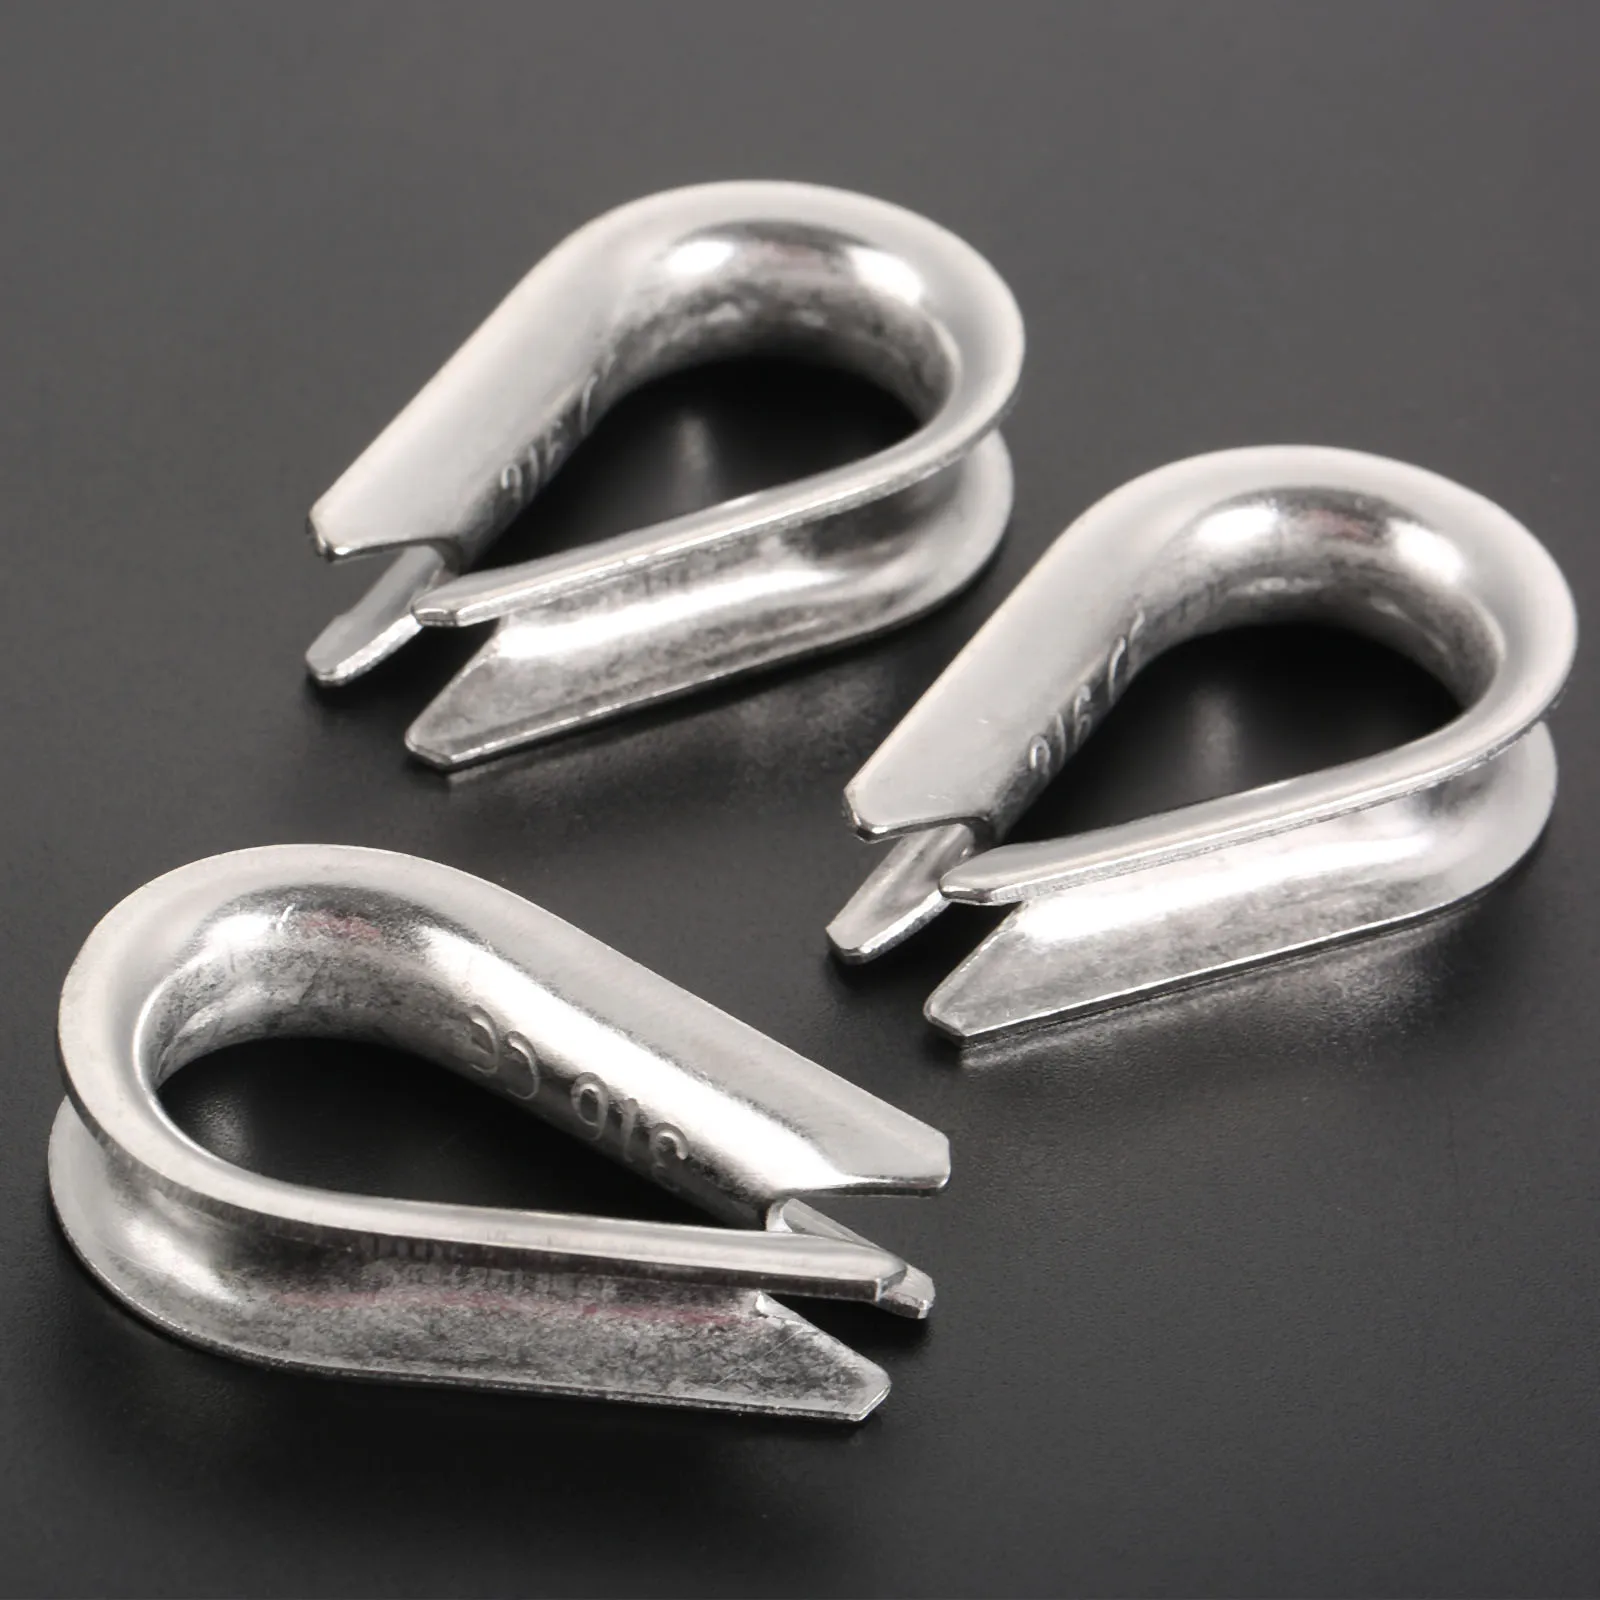 10Pcs Wire Rope Thimbles Marine Grade 316 Stainless Steel for 8mm / 5/16 Inch Diameter Wire Rope/Cable Boats Accessories